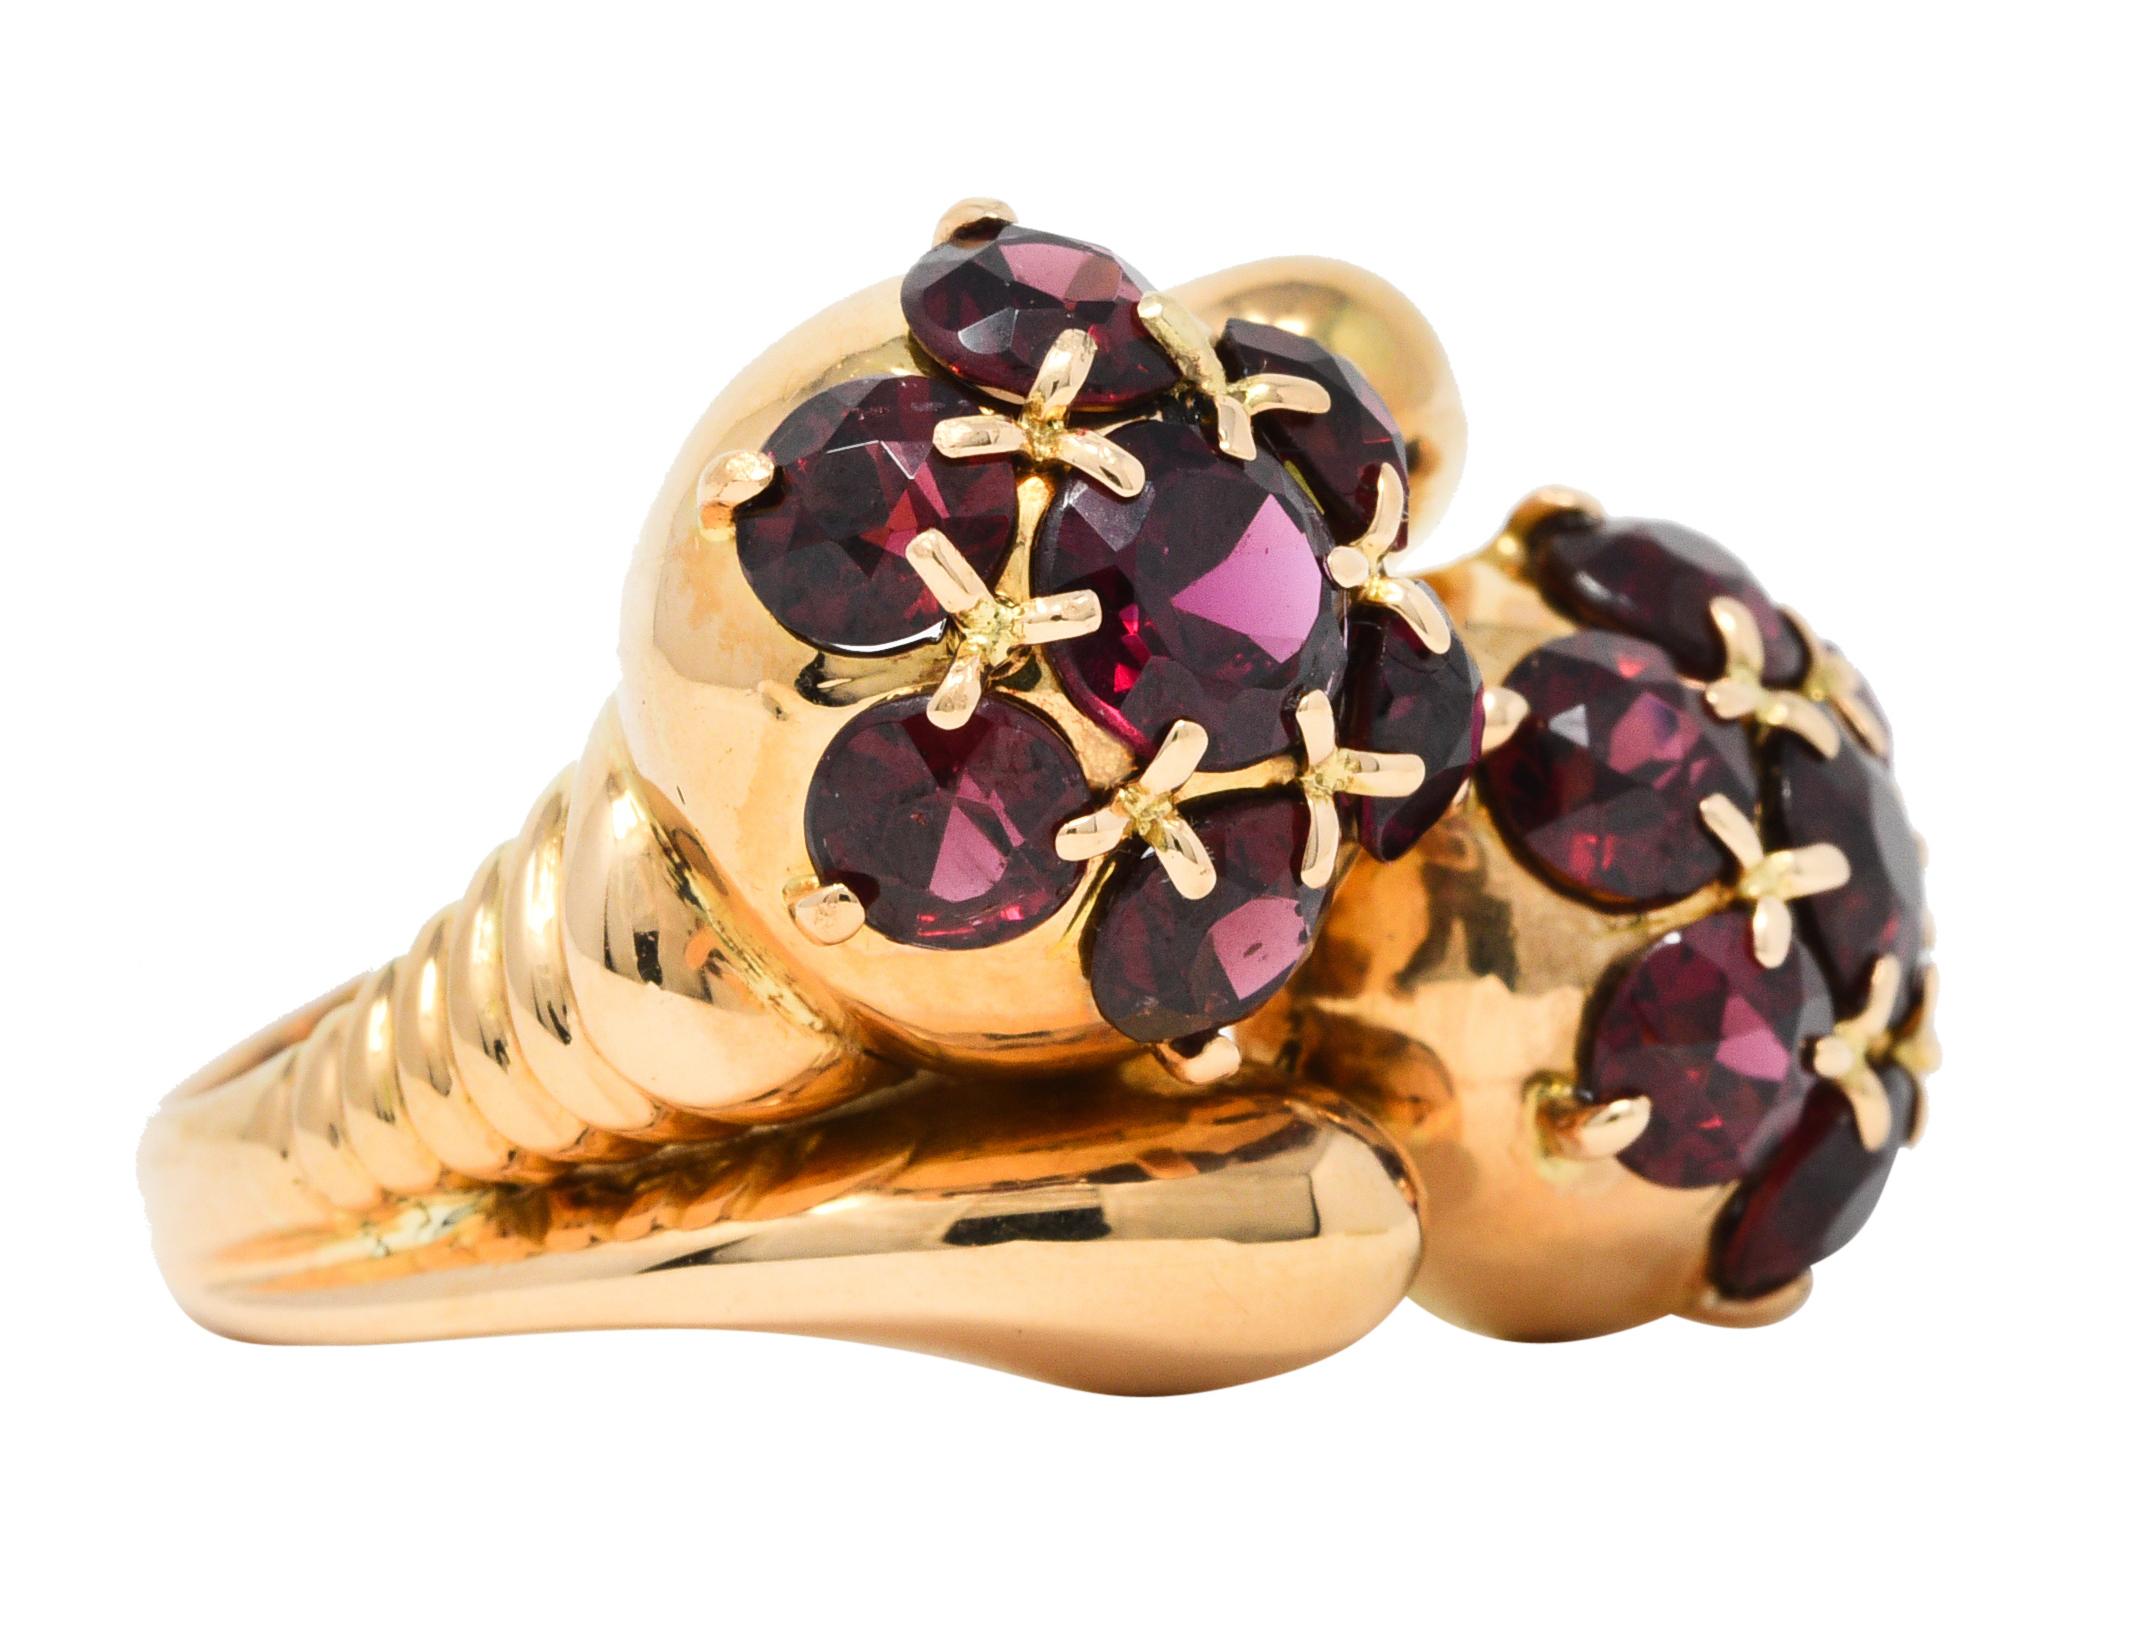 Bypass style ring features two substantial clusters of garnet with stylized criss-cross prongs

Garnets are round cut and a very well matched medium dark purplish red color

Completed by split shoulders with ribbed detailing and a bright